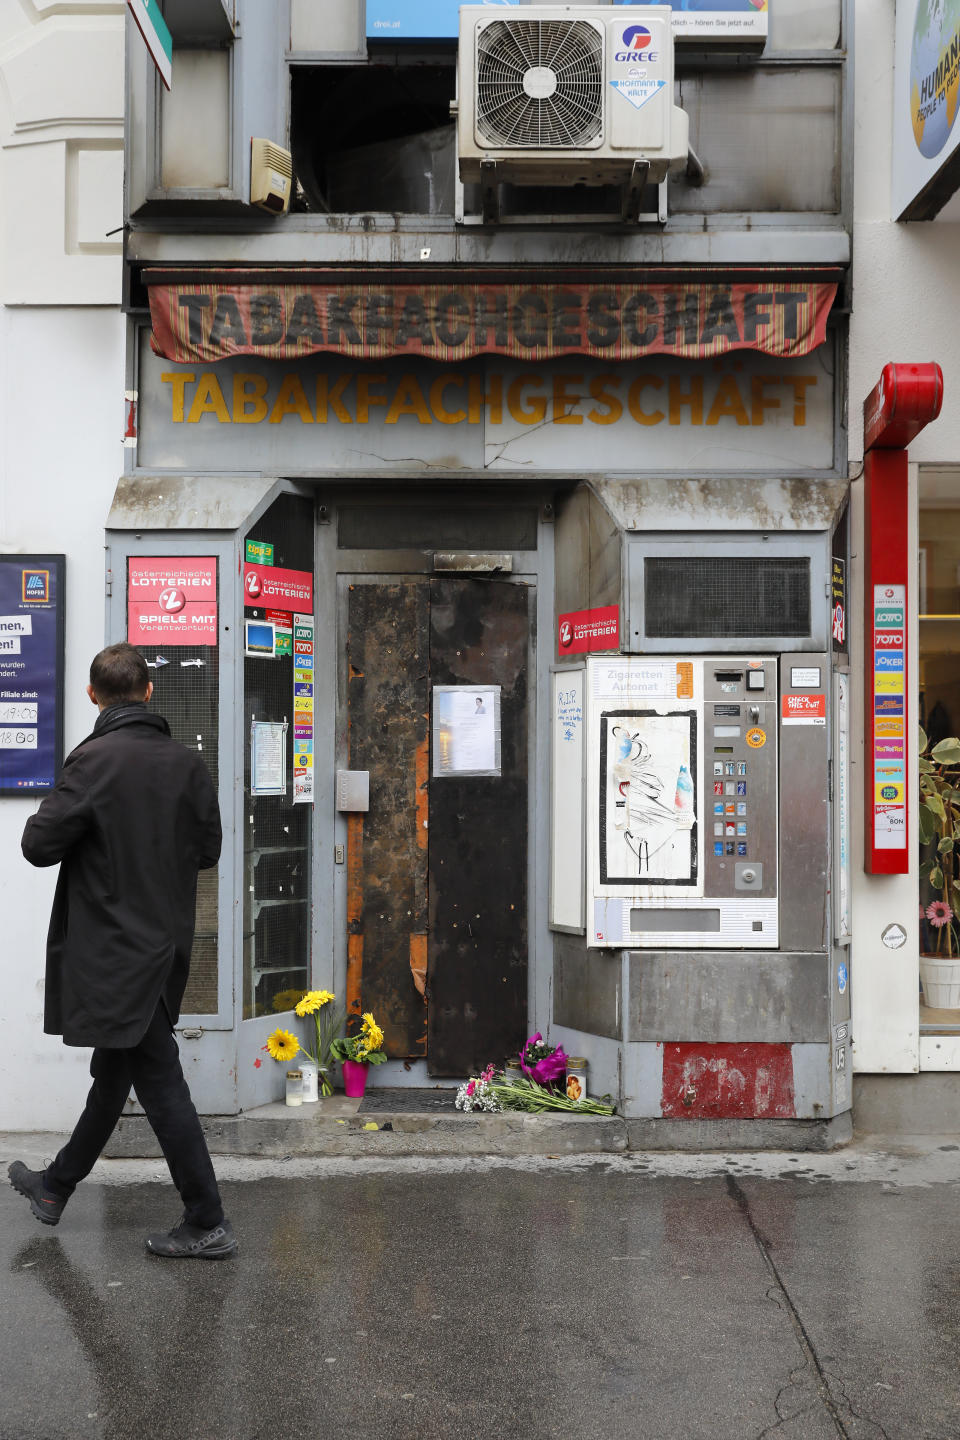 The entrance of the tobacco shop belonging to a woman who was covered on gasoline and lit on fire by her former partner Vienna, Austria, Friday, May 14, 2021. Austria is one of the few European Union countries where the number of women killed is higher than the number of men. The recent high-profile cases have led to widespread protests, demands for government intervention and condemnations from top politicians. (AP Photo/Lisa Leutner)